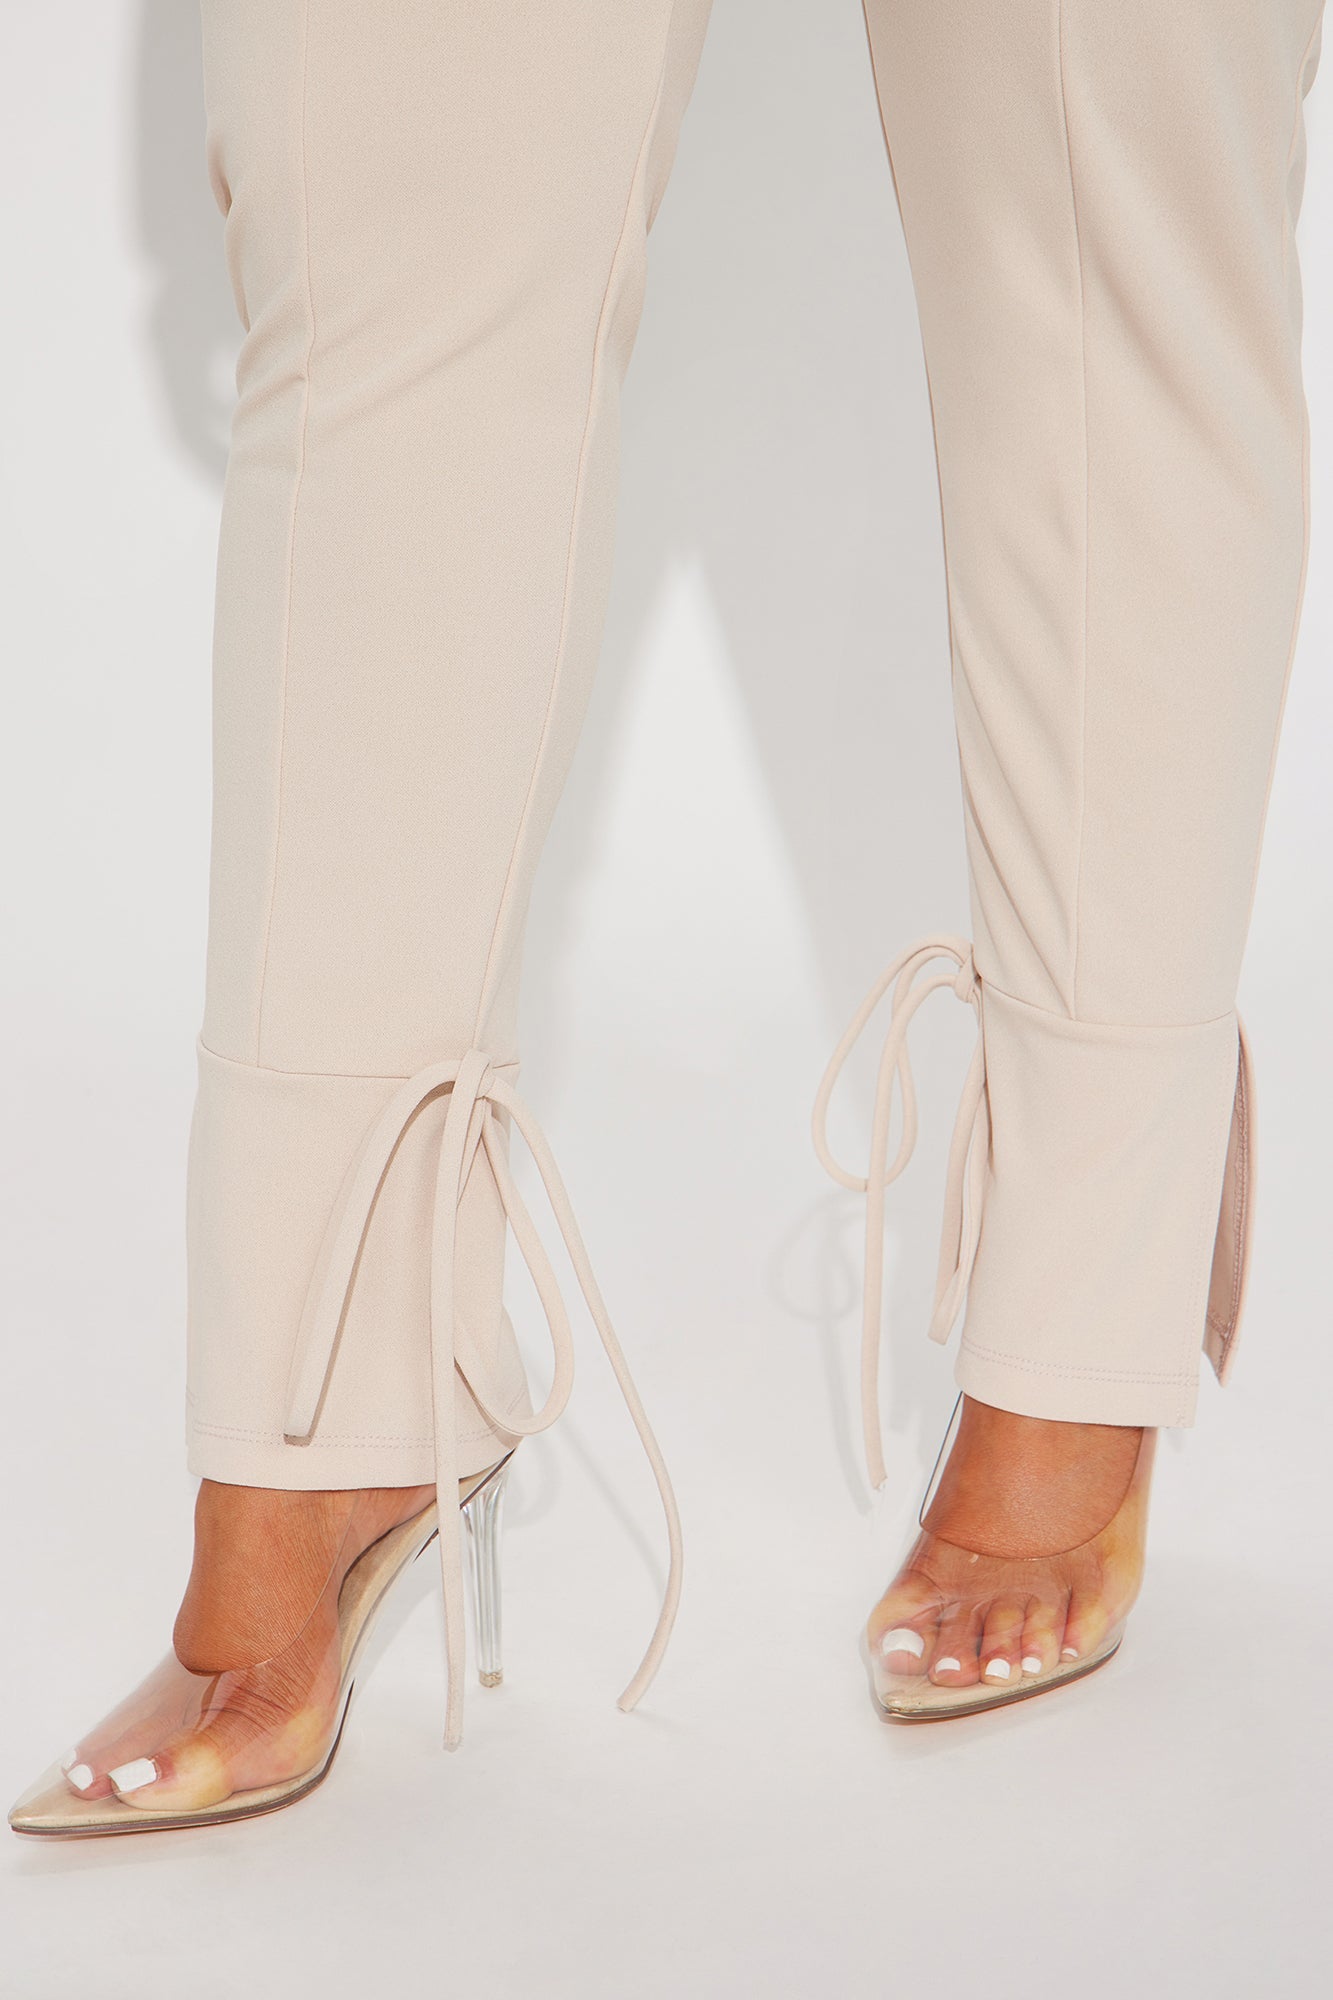 Head Of The Table Pant Suit - Taupe